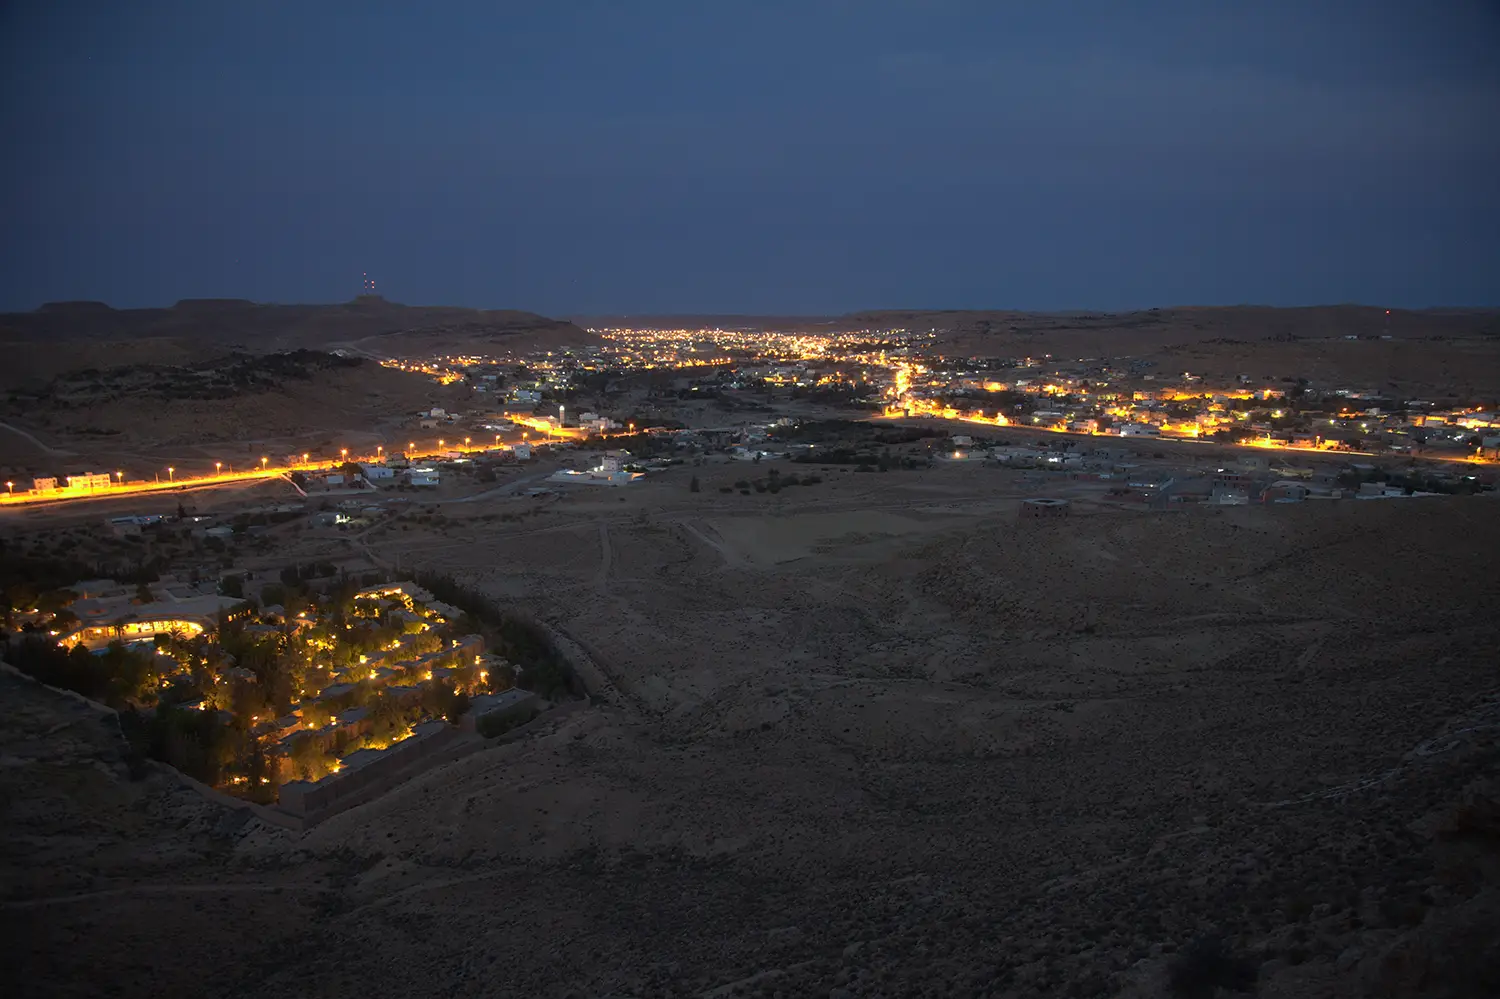 Dusk view of a barren desert landscape cut through with brightly lights indicating a settlement that carved downwards into the desert ground.